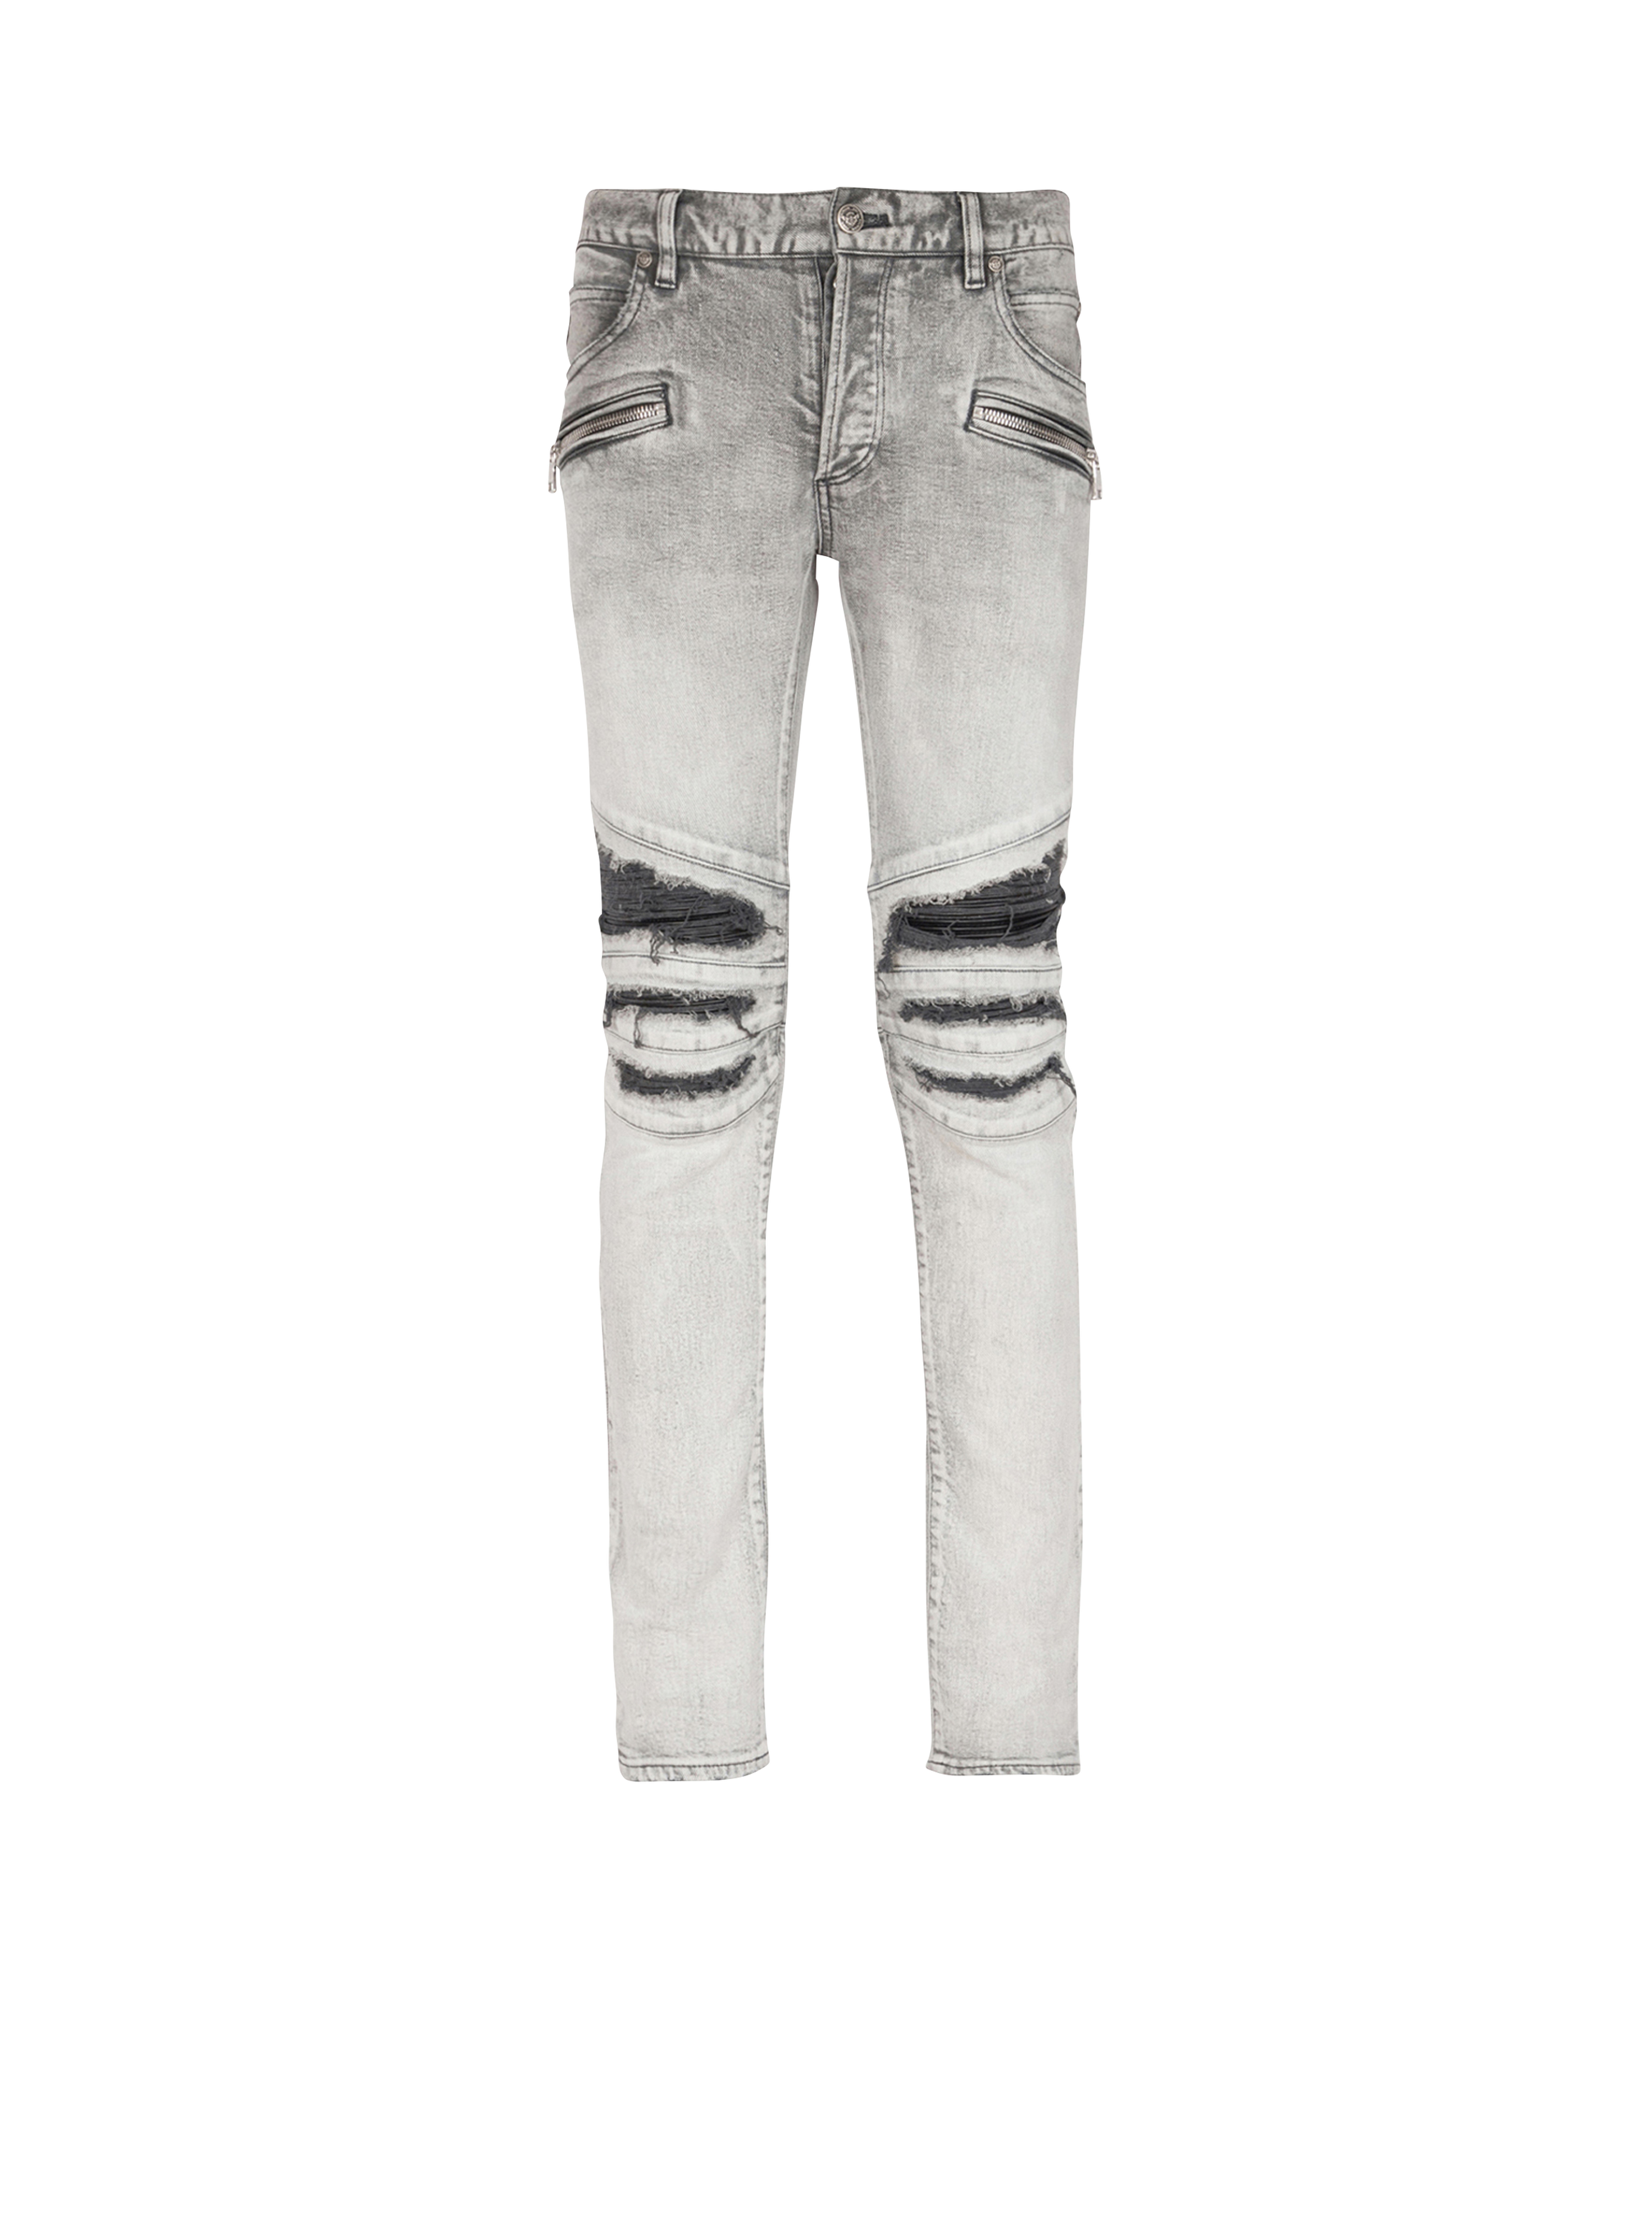 Slim cut ripped cotton jeans with synthetic leather panels, grey